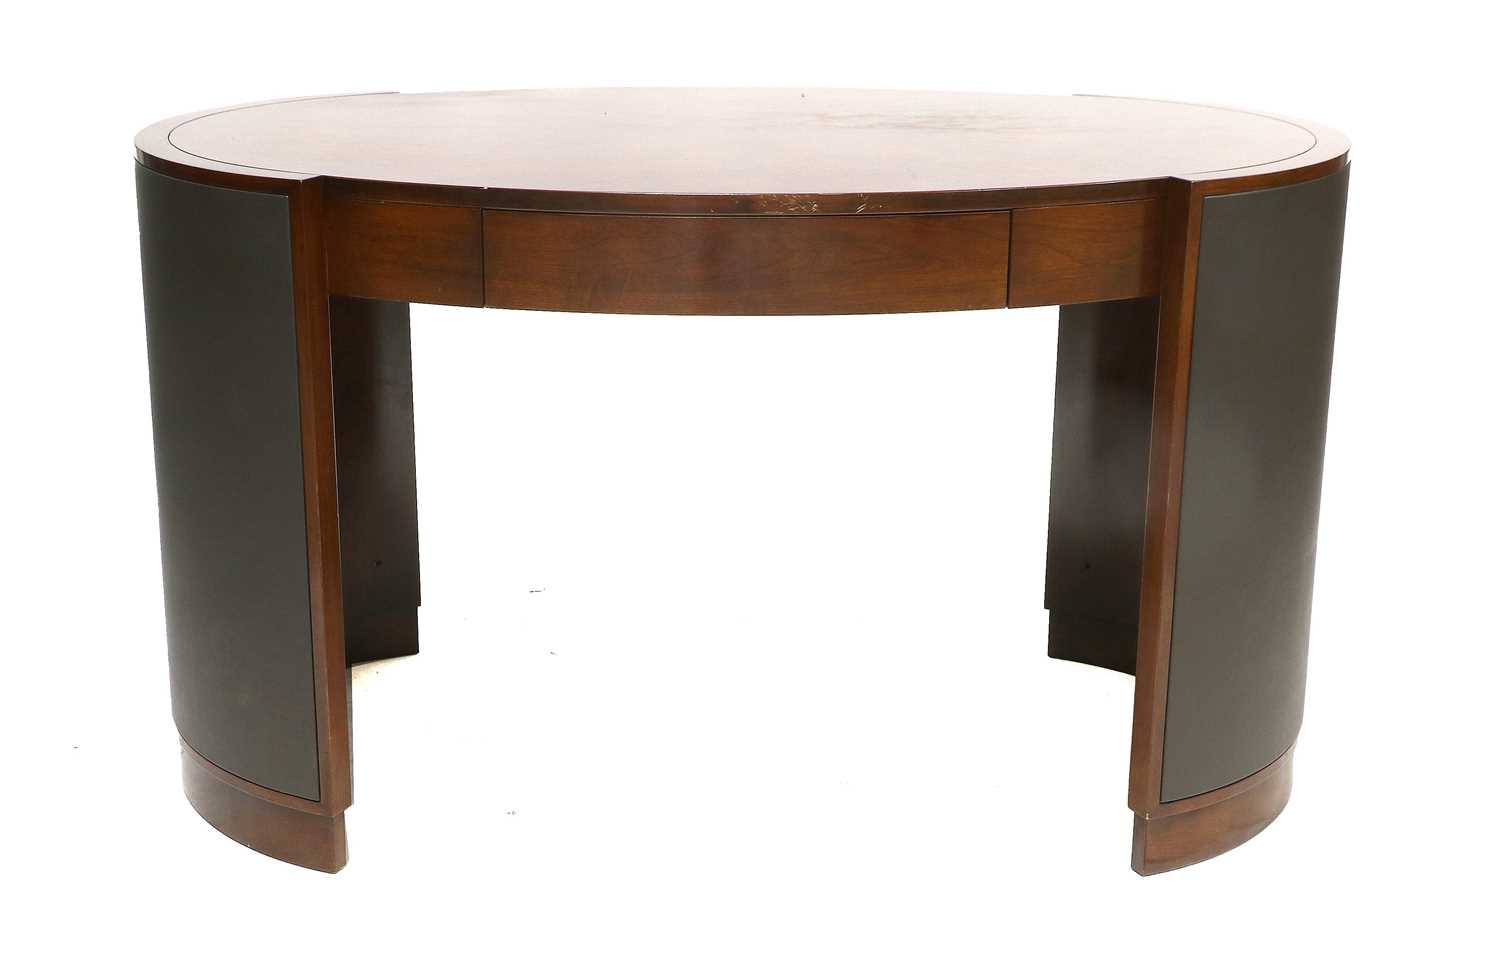 A Selva of Italy Mahogany Oval Desk, with a quarter-veneered top above a drawer, the curved end